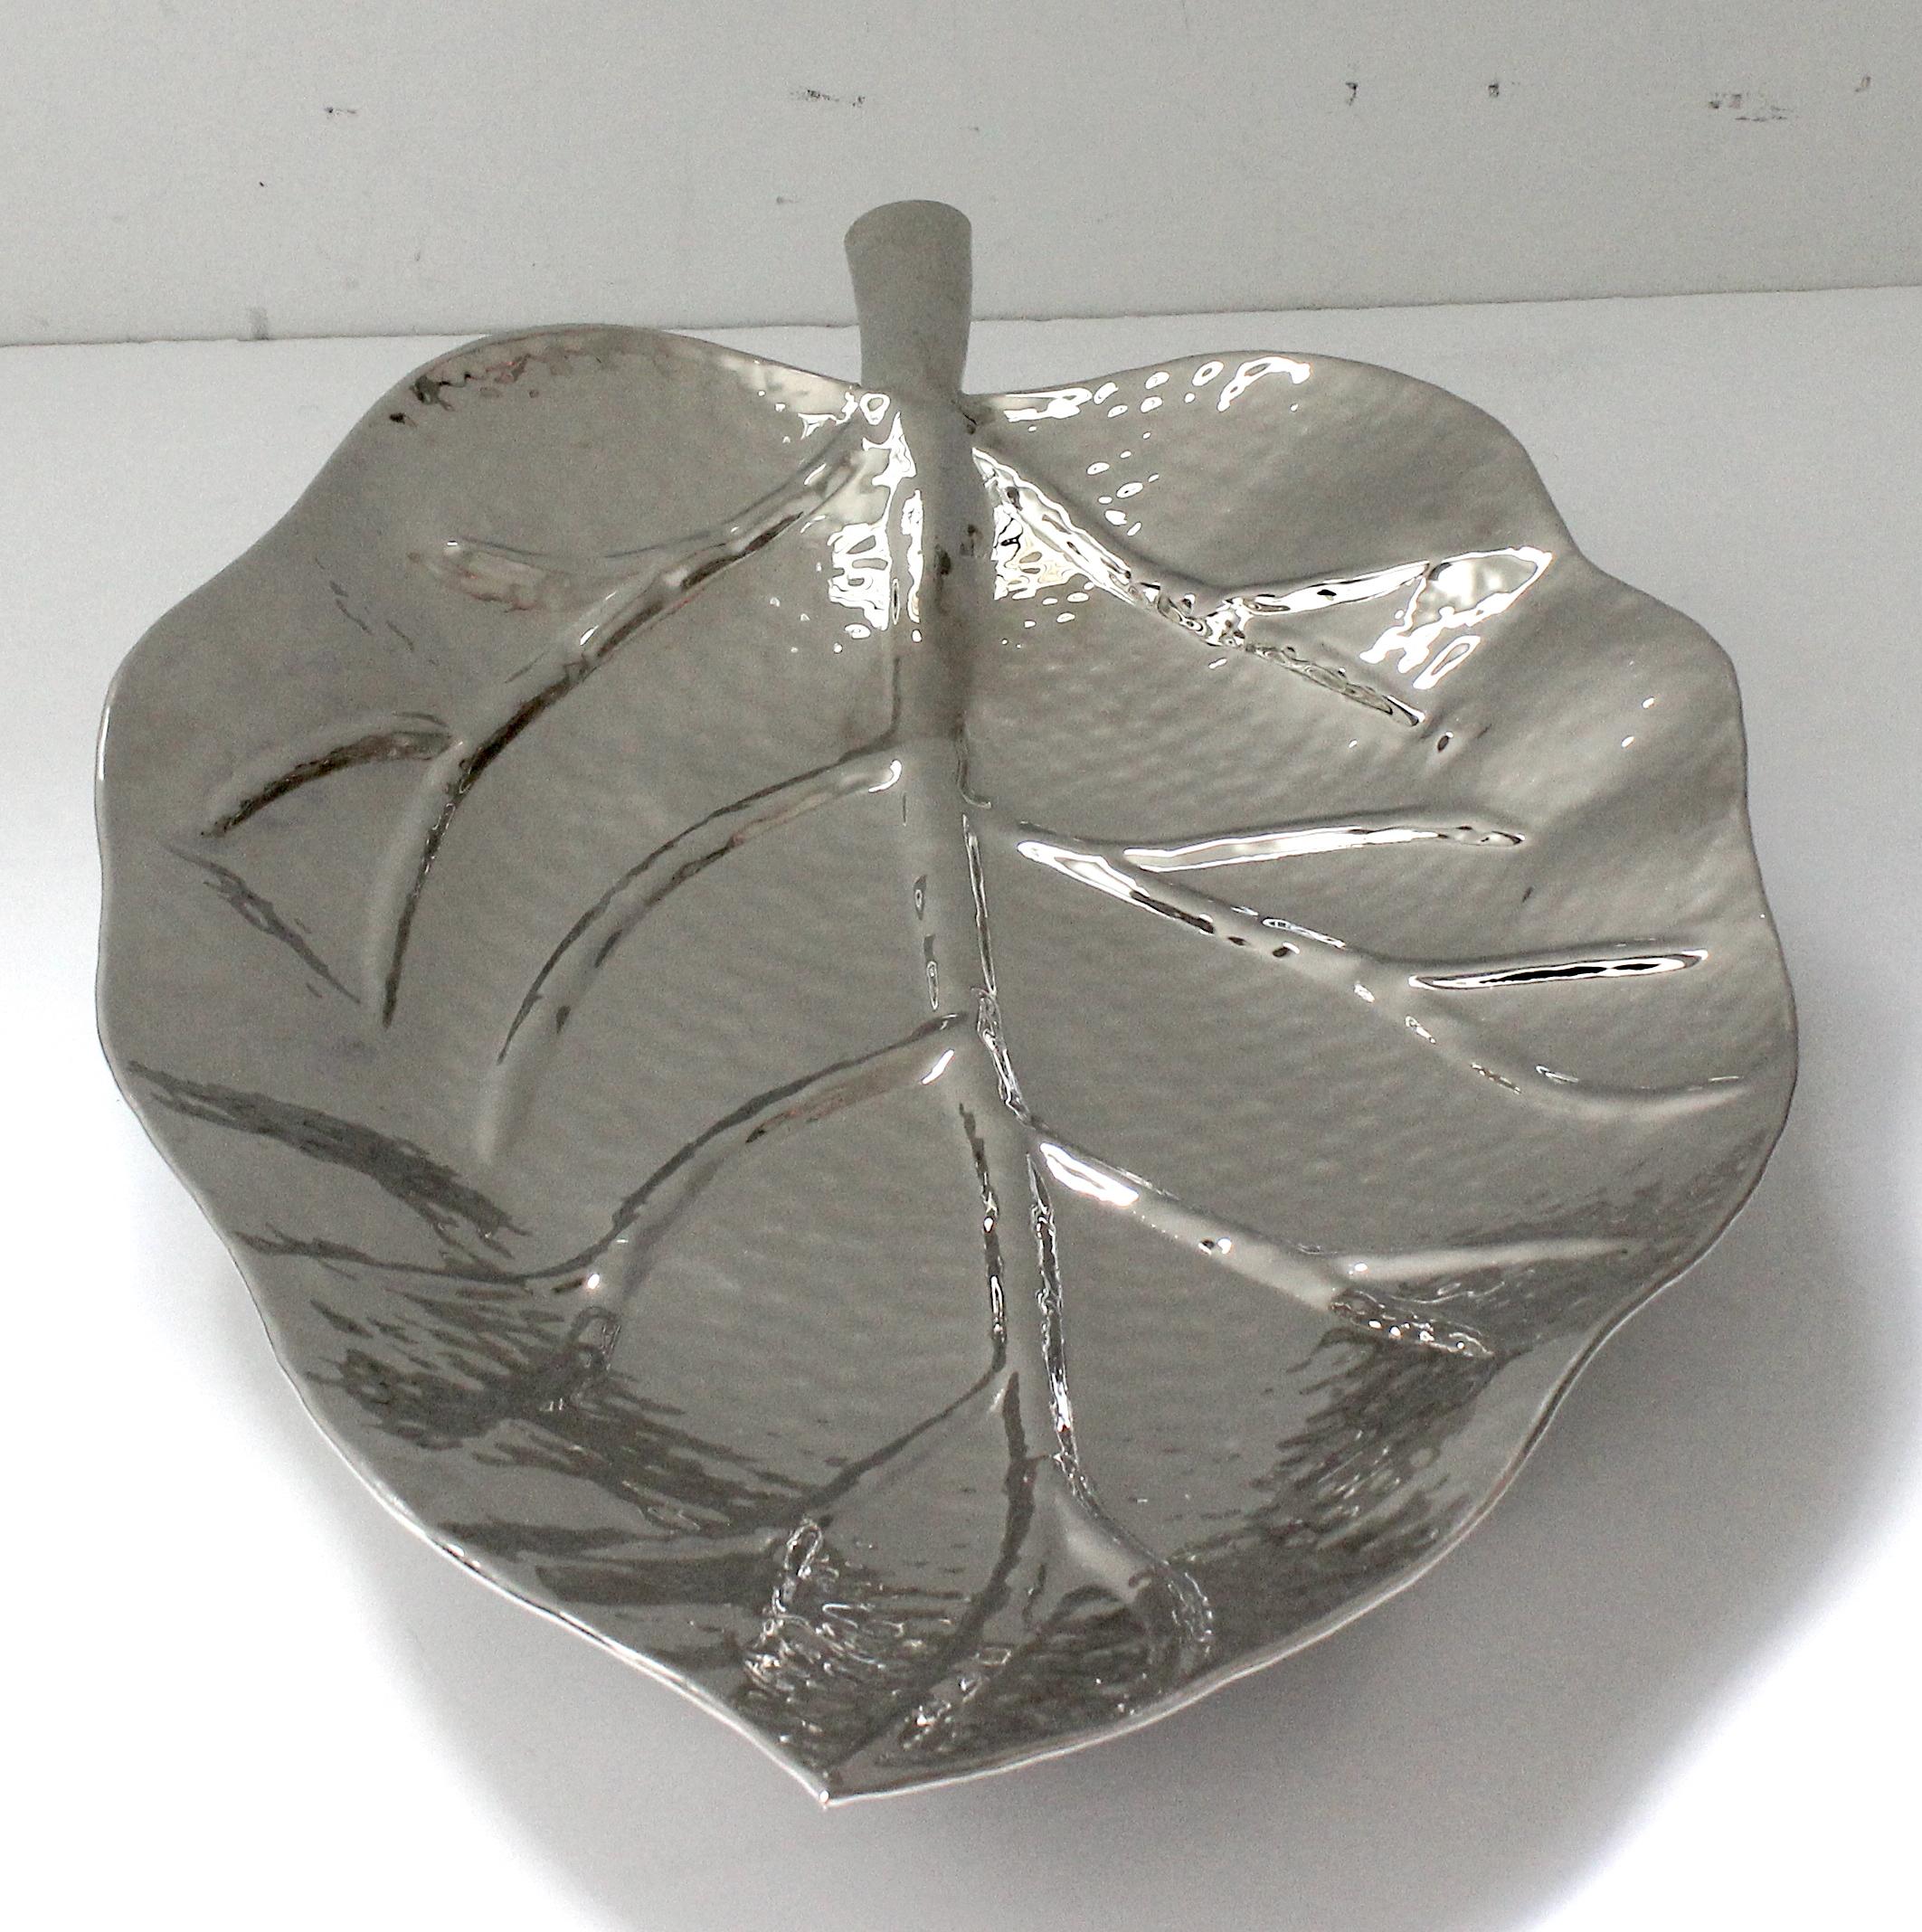 Cast Nickel Plated Leaf Form Serving Tray by Iconic Snob Galeries For Sale